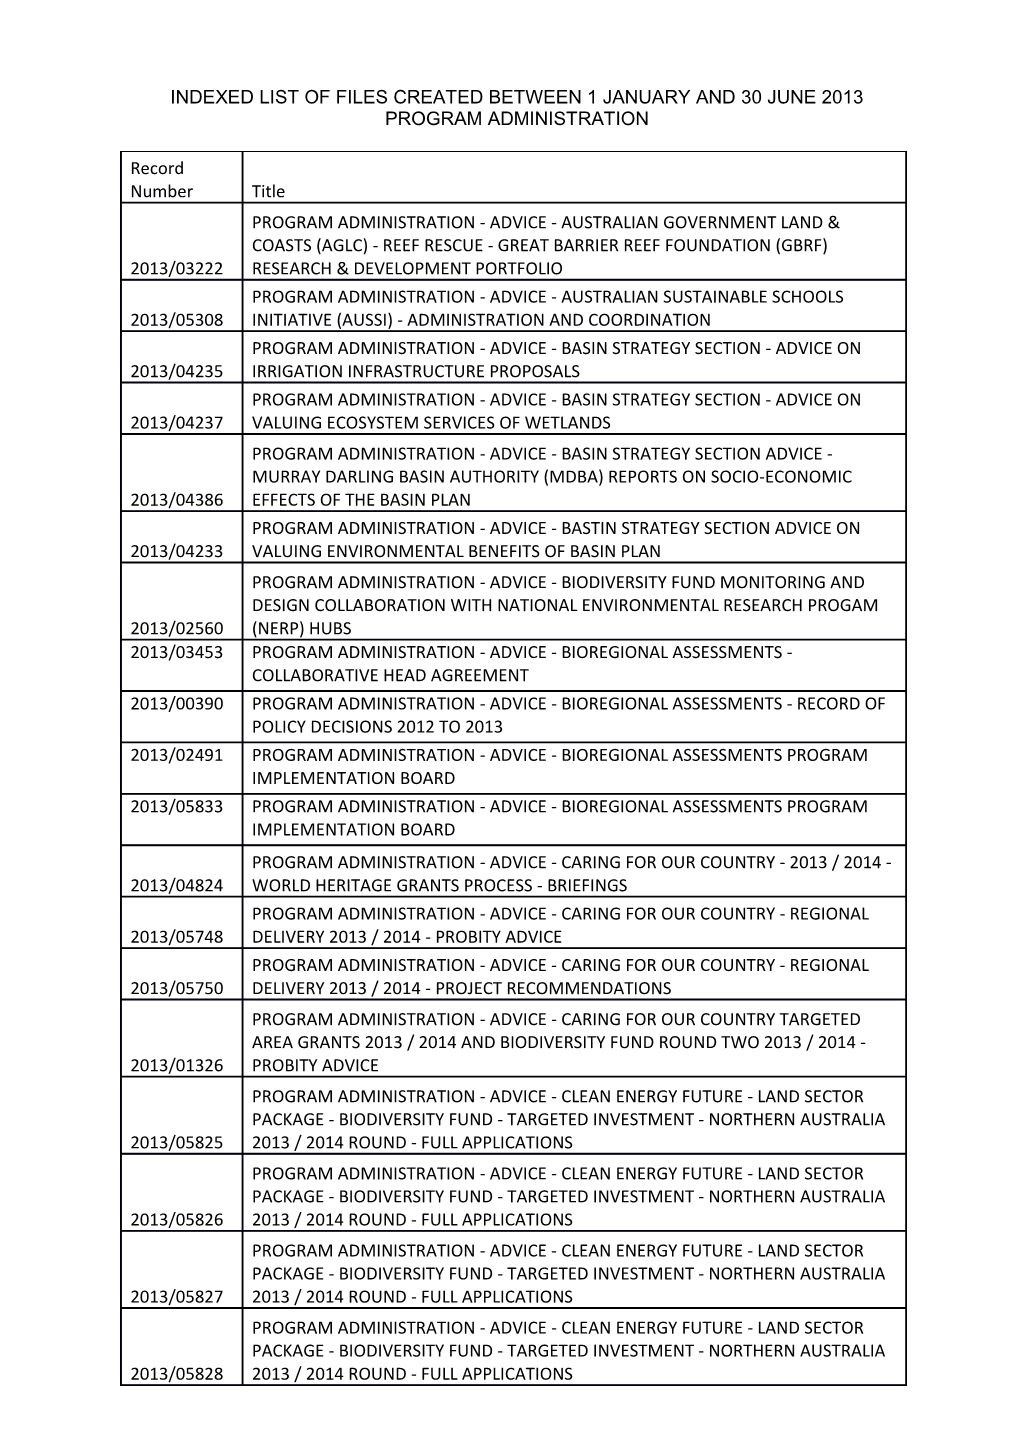 Indexed List of Files Created Between 1 January and 30 June 2013 Program Administration